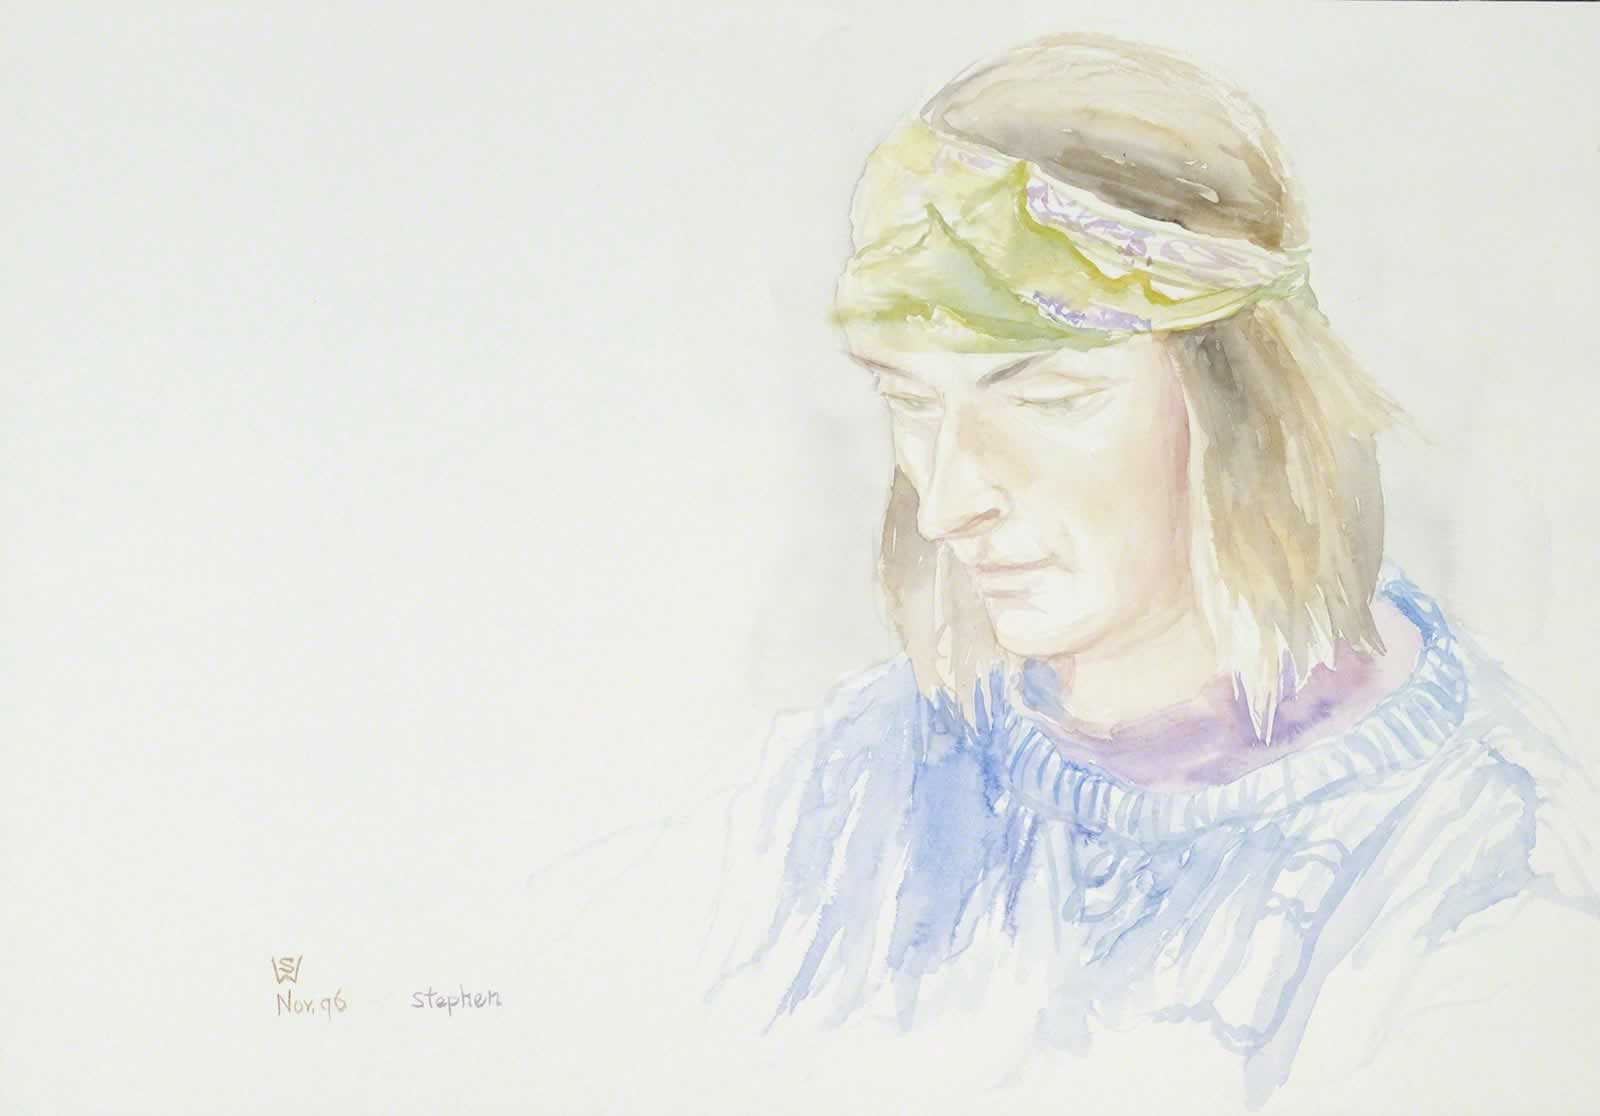 Stephen in Green Head-scarf by Susan Dorothea White